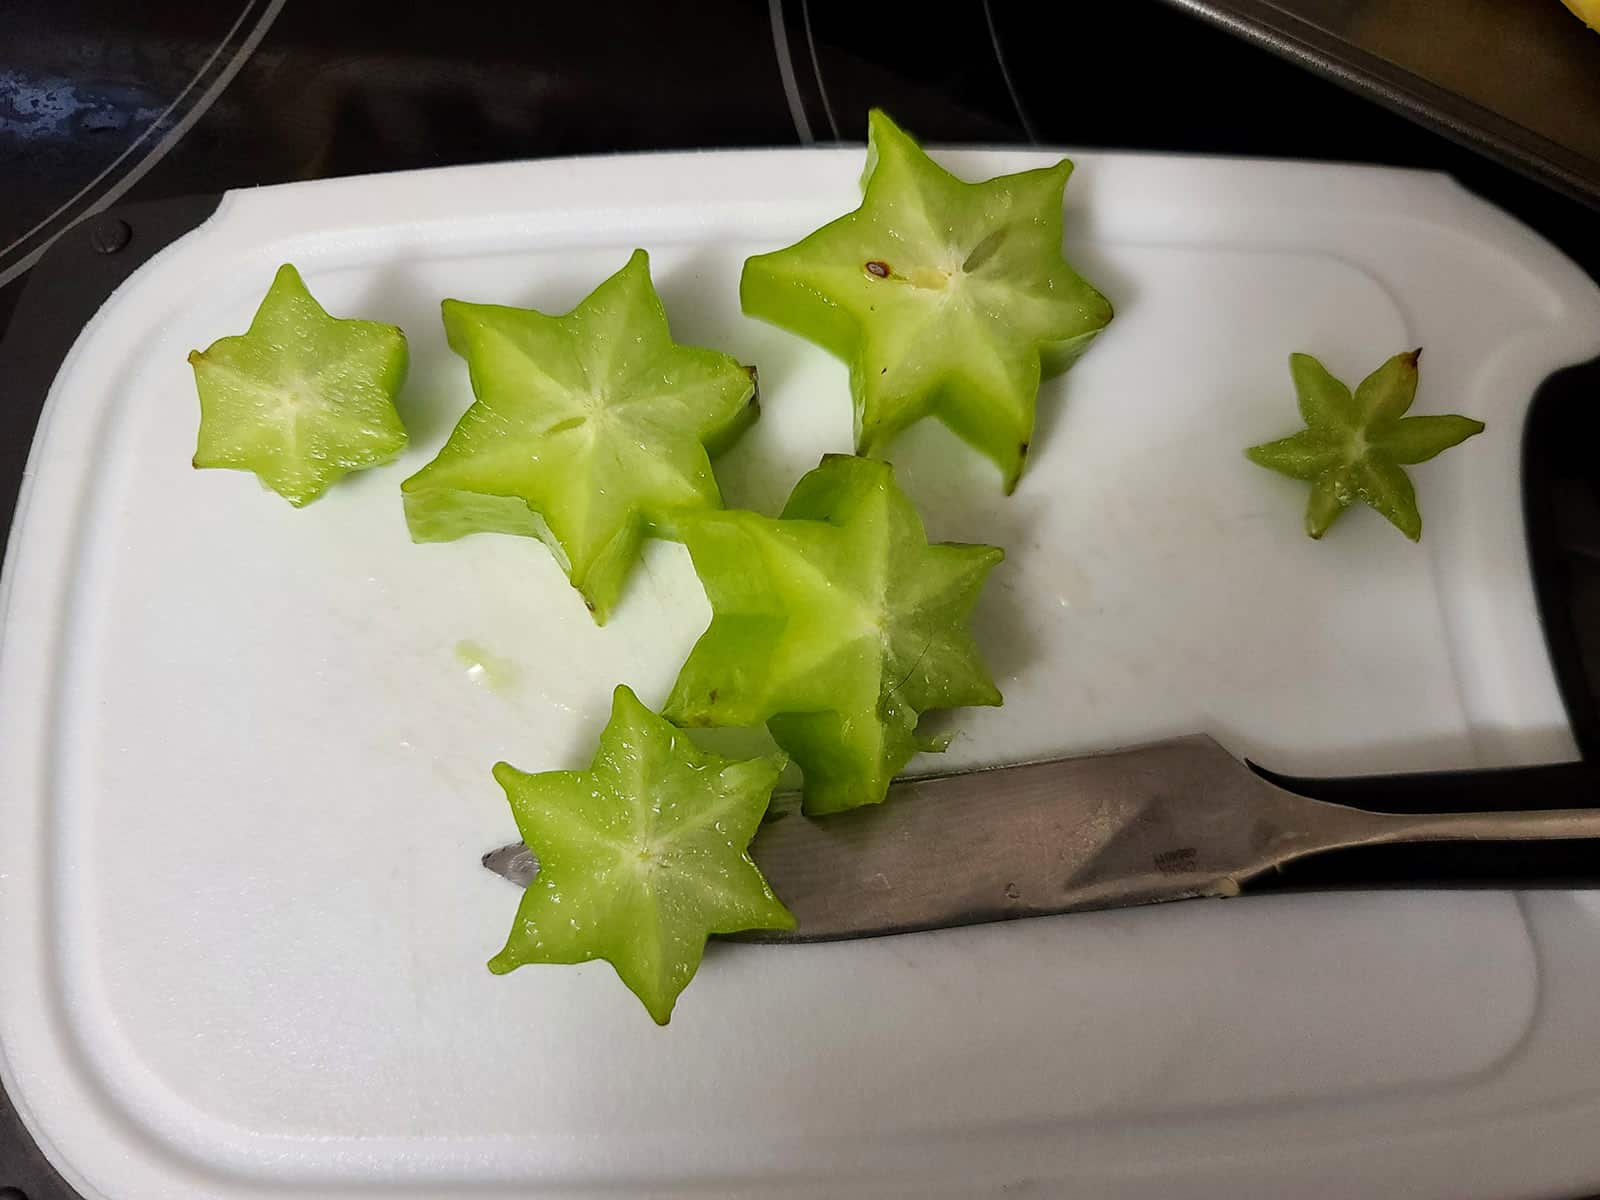 A sliced up star fruit on a cutting board.